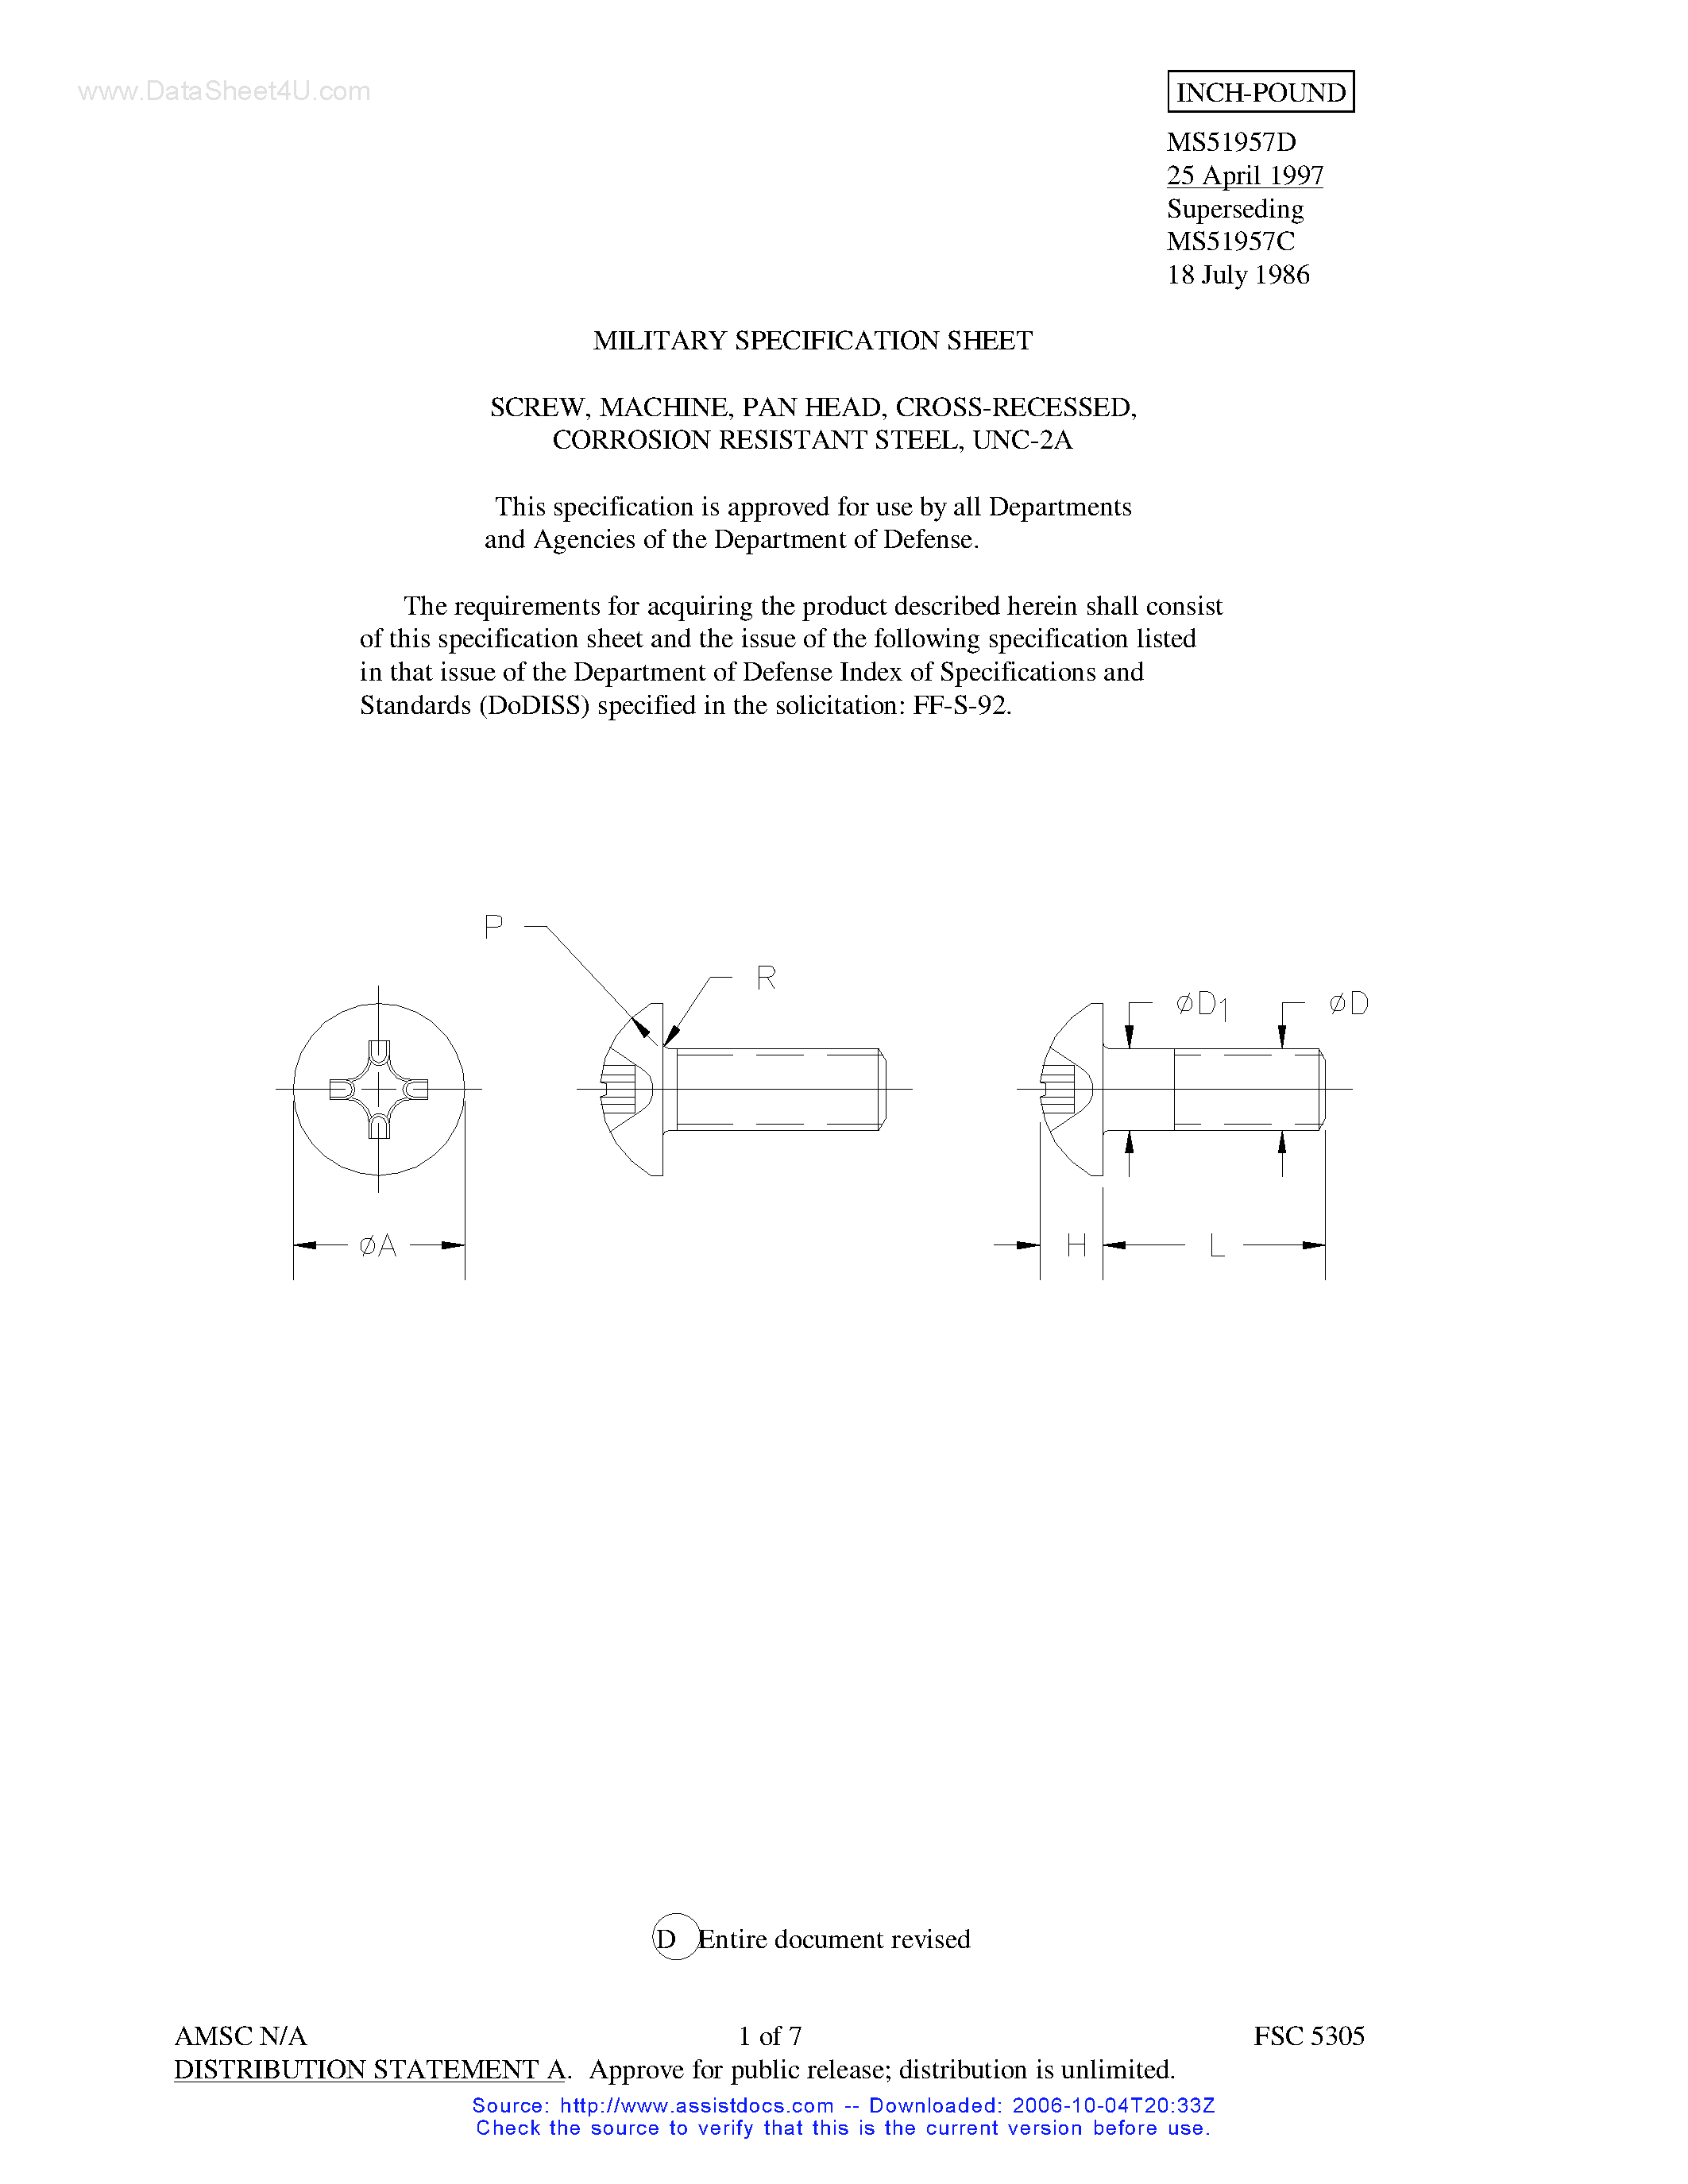 Datasheet MS51957D - Corrosion Resistant Steel page 1